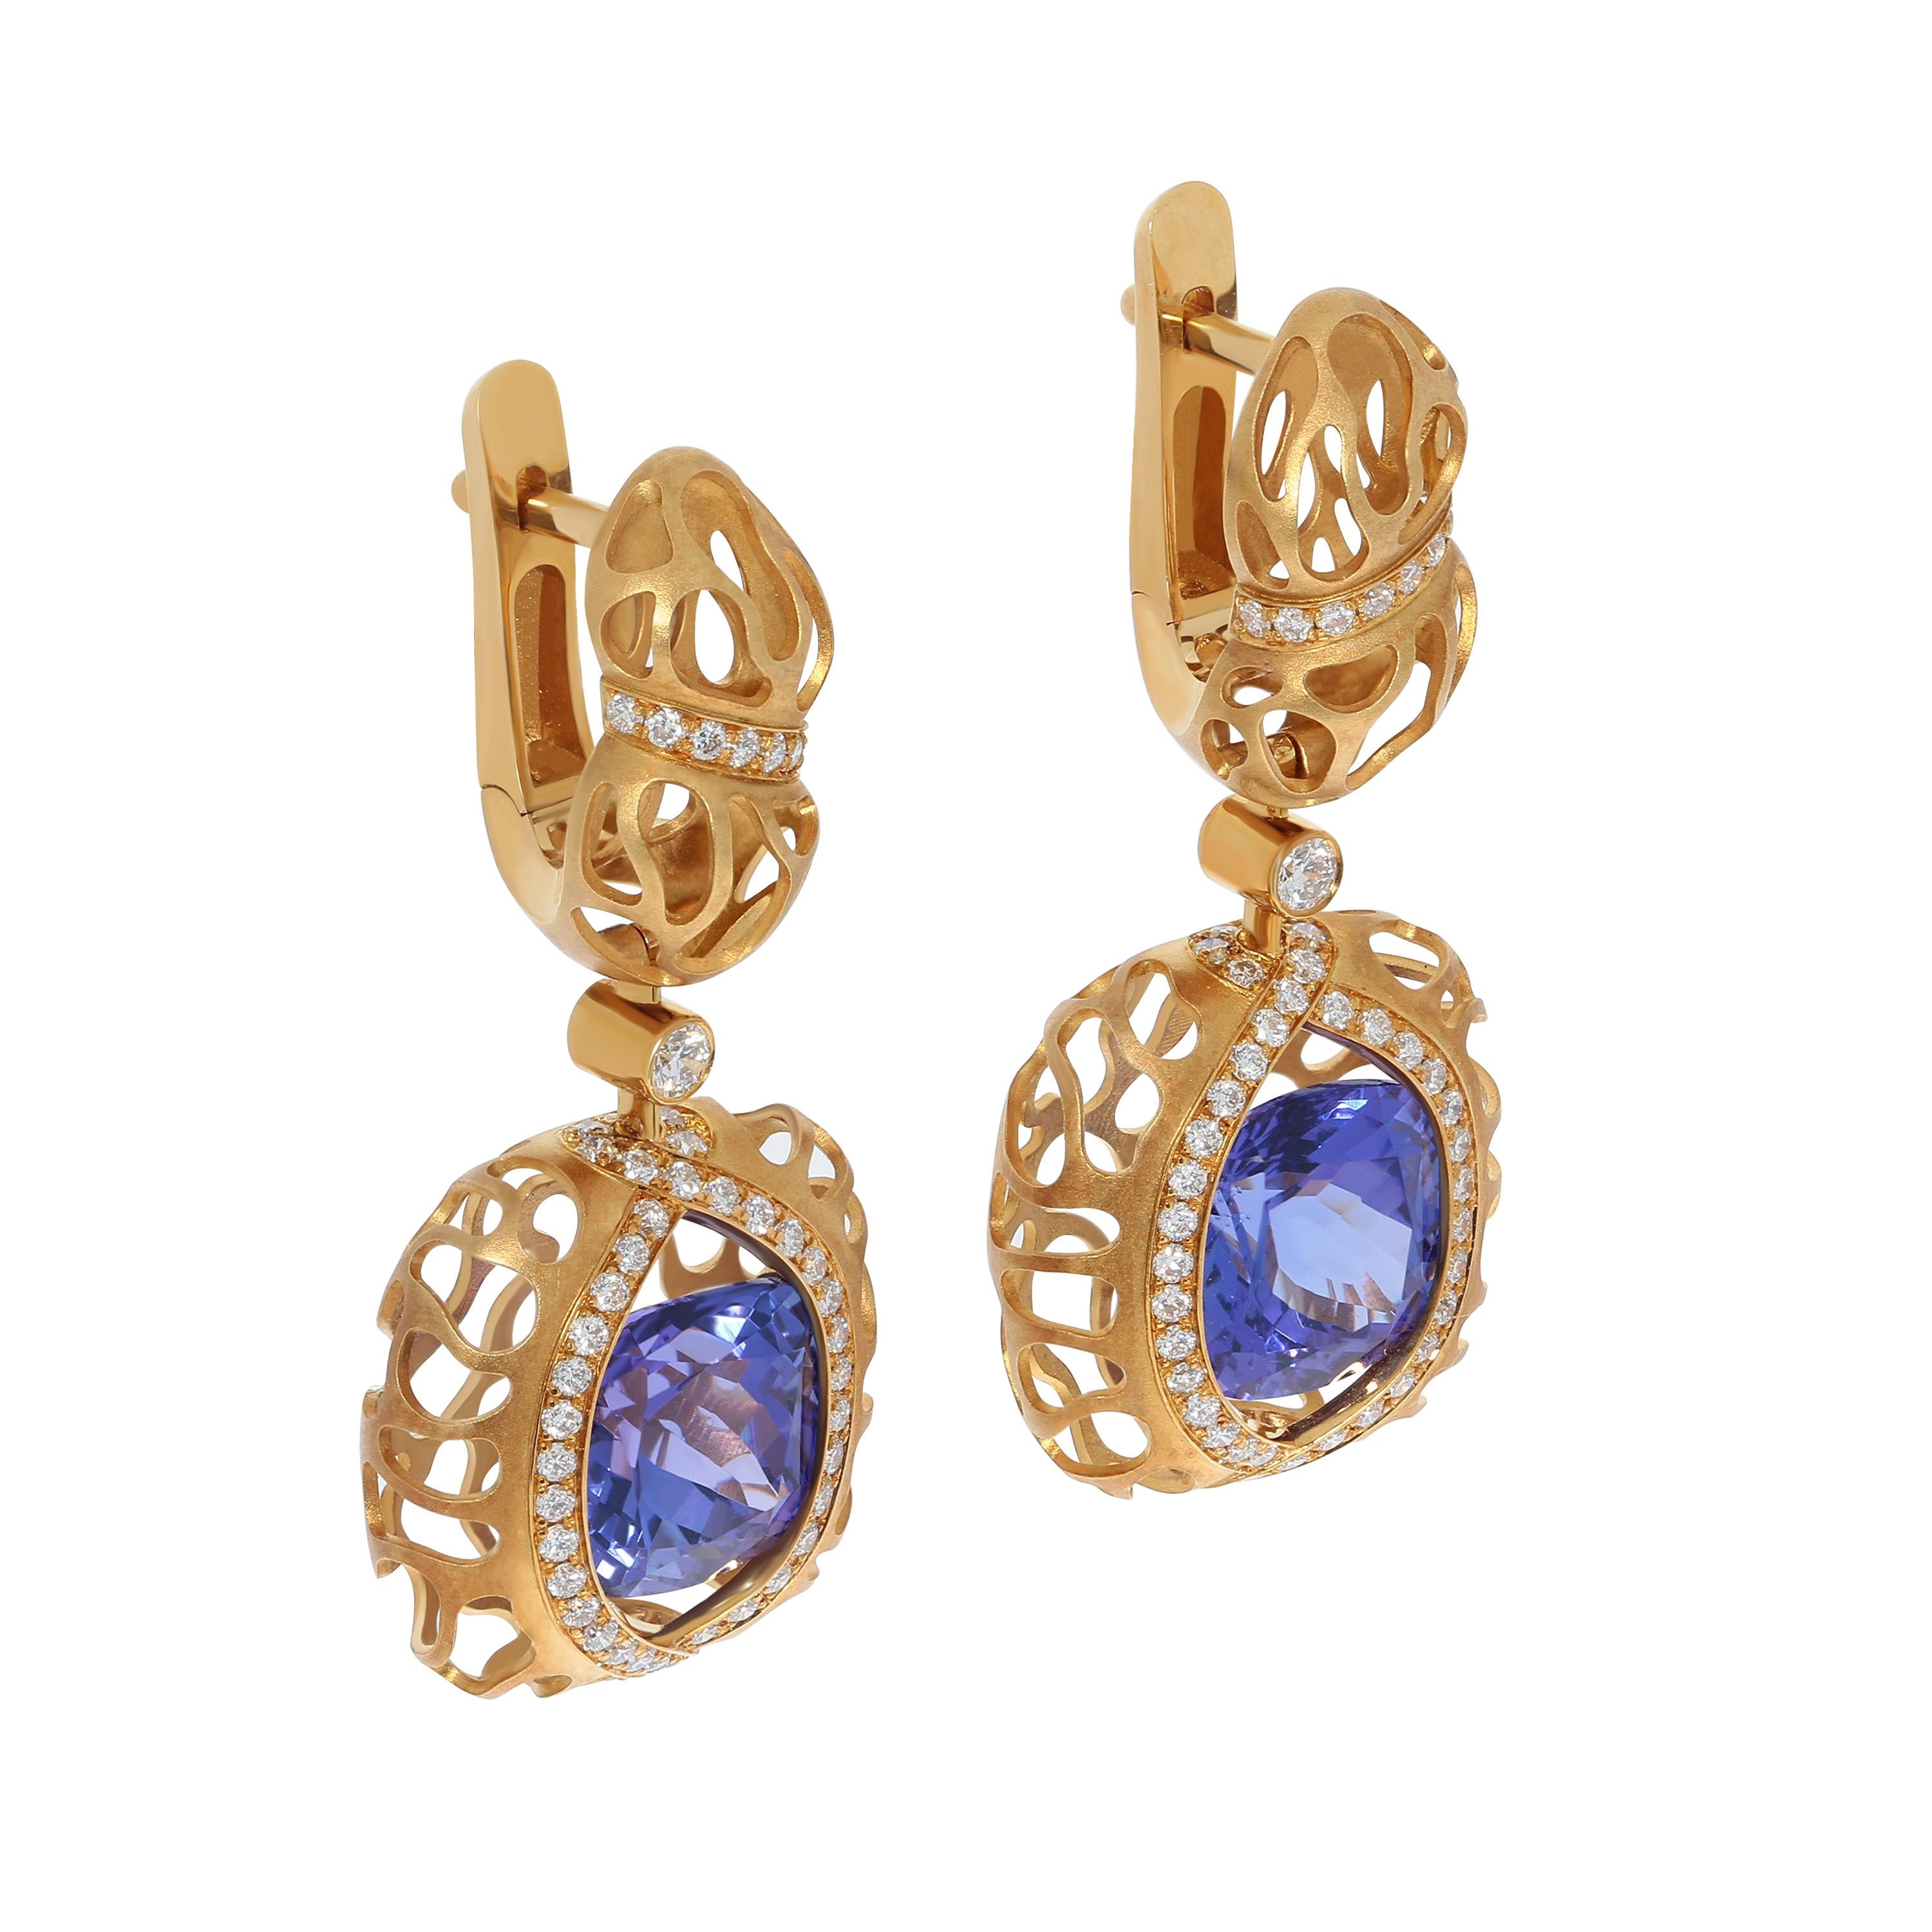 Tanzanite 7.10 Carat Diamonds 18 Karat Yellow Gold Coral Reef Earrings
Earrings from the Coral Reef collection, where the distinctive feature is the shape of 18 Karat Yellow Gold, made in the form of coral reefs. The perfect combination of two 7.10